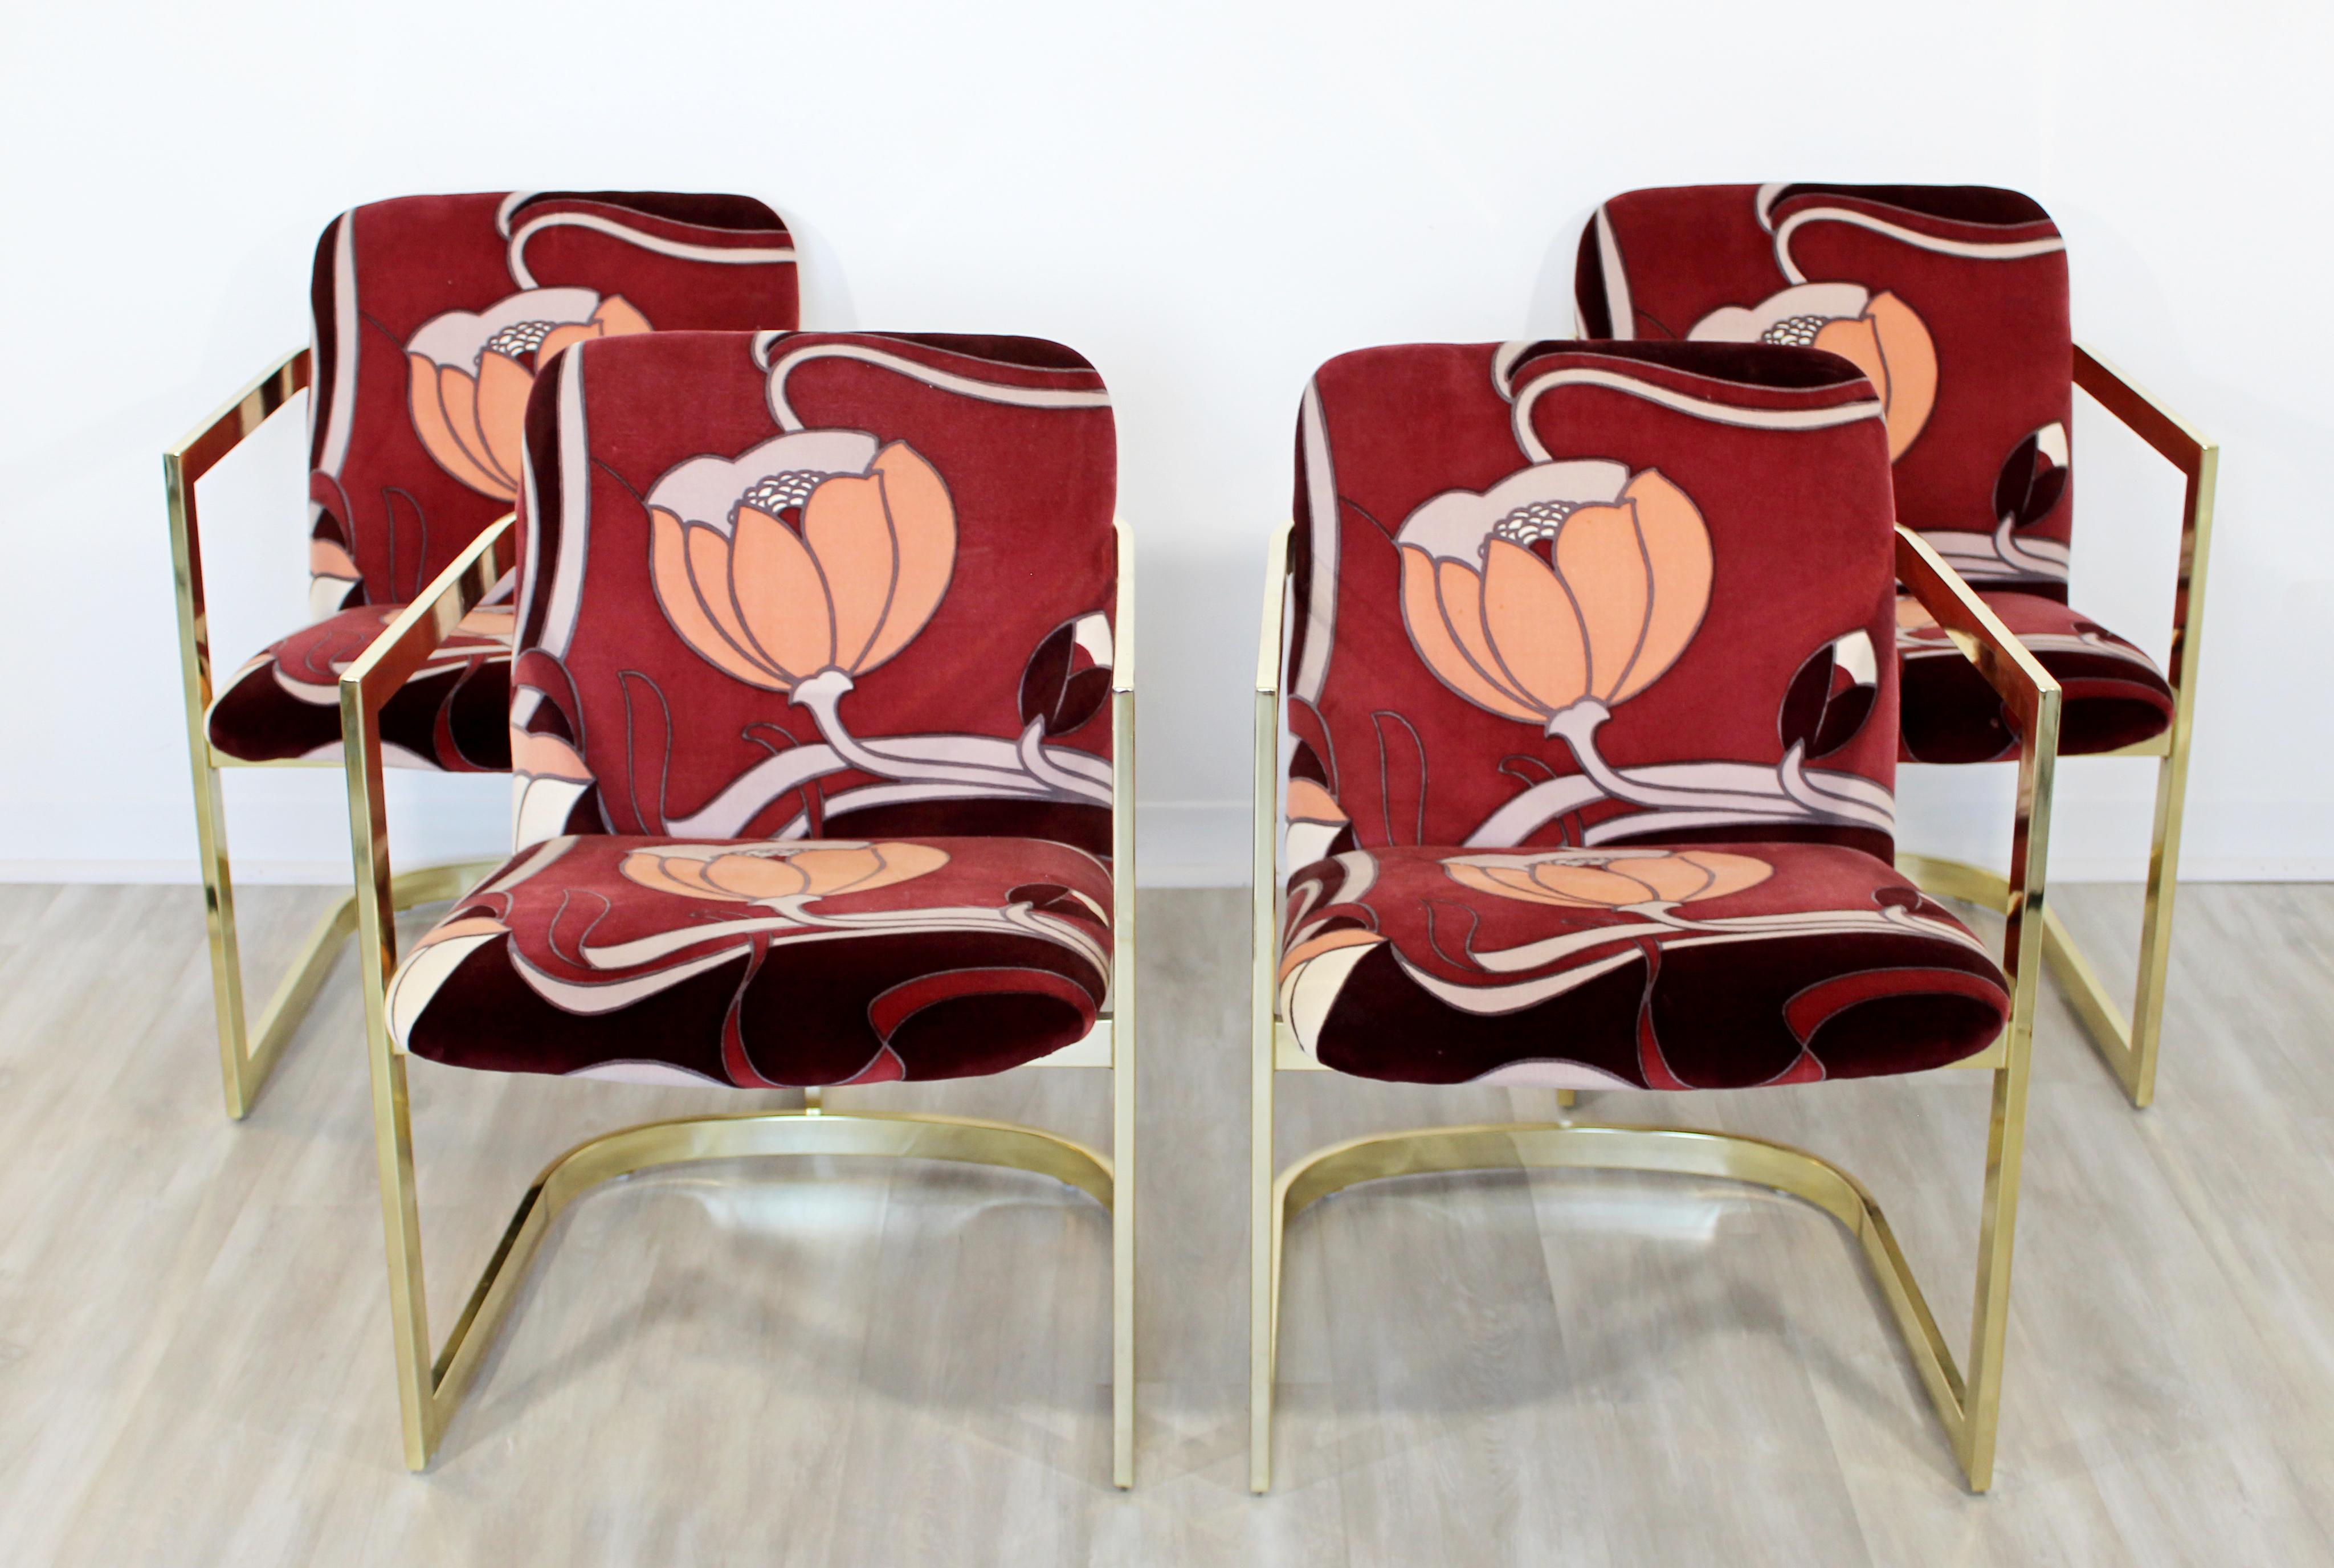 For your consideration is a rare set of four dining armchairs, made of curved cantilever brass and with Jack Lenor Larsen fabric, by the Design Institute of America, circa 1970s. In very good condition. The dimensions are 22